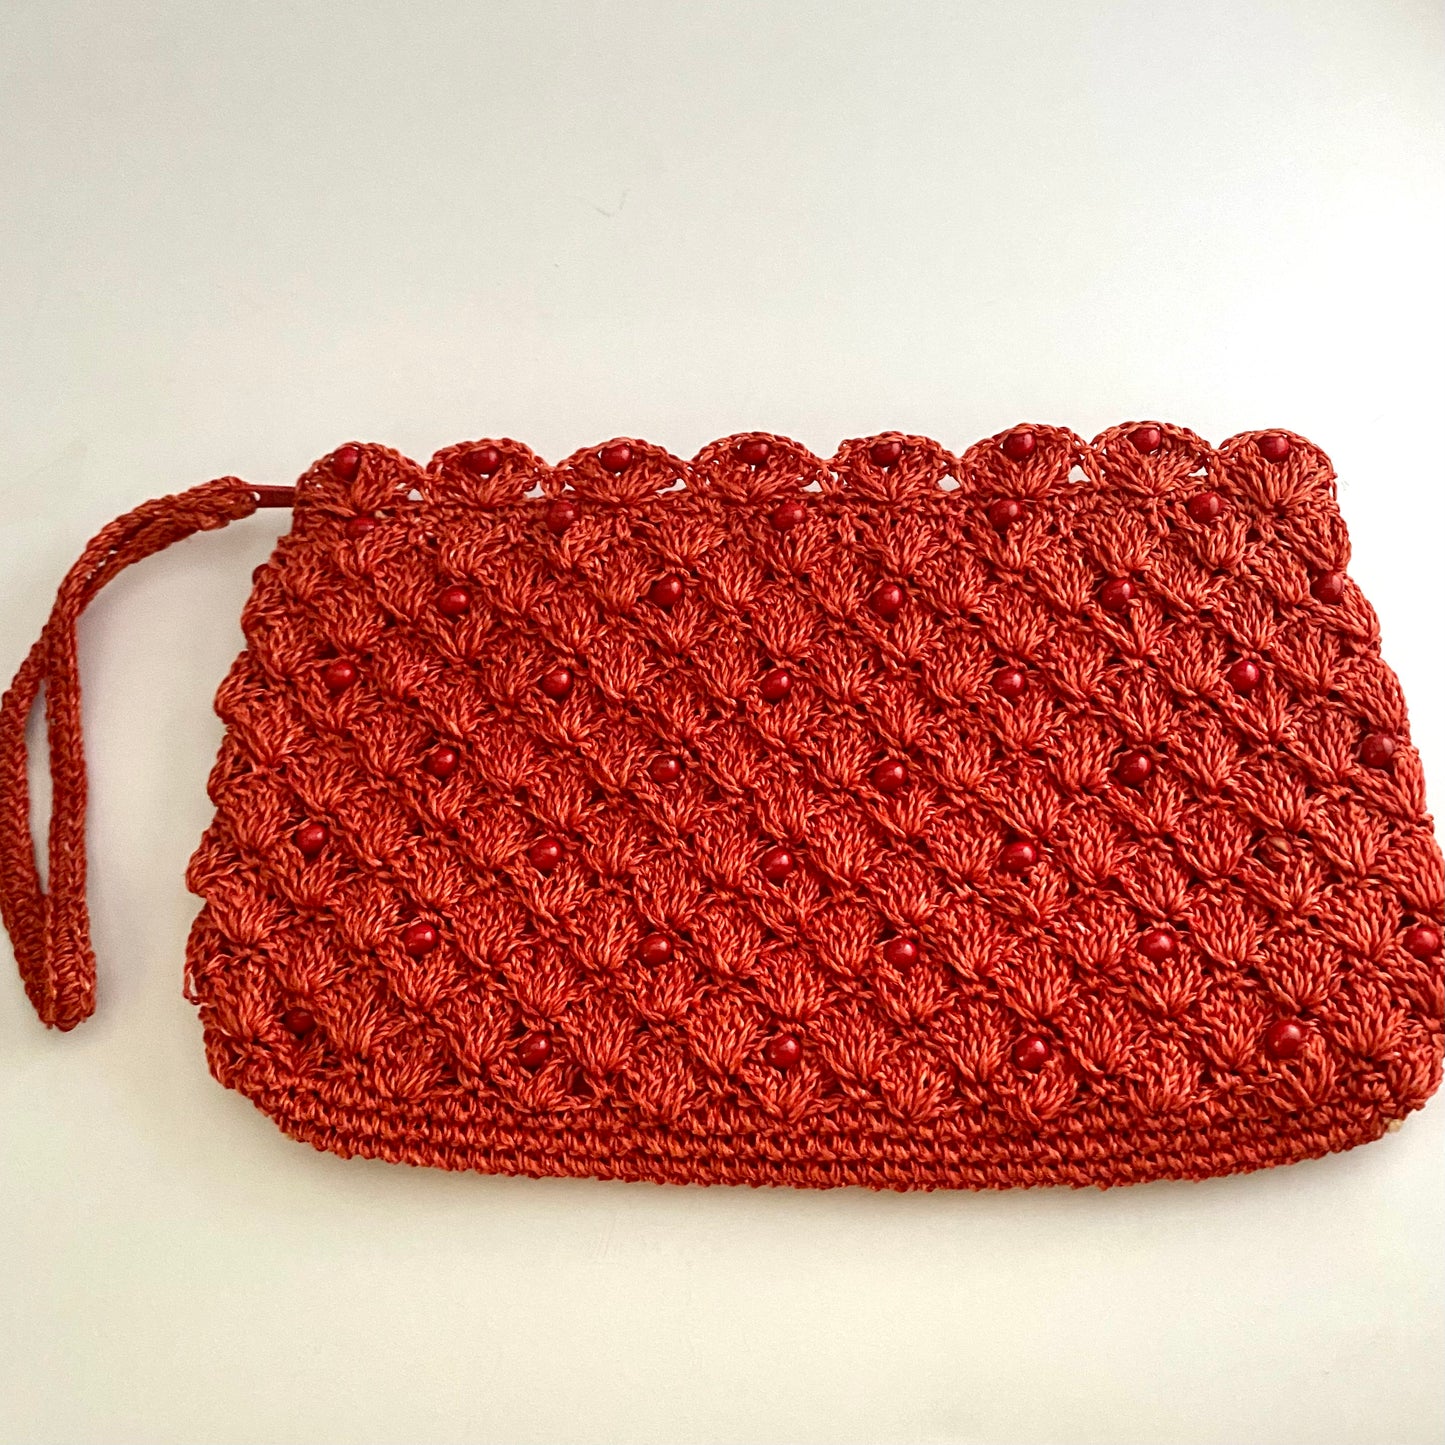 Late 70s/ Early 80s Made In Japan Woven Clutch